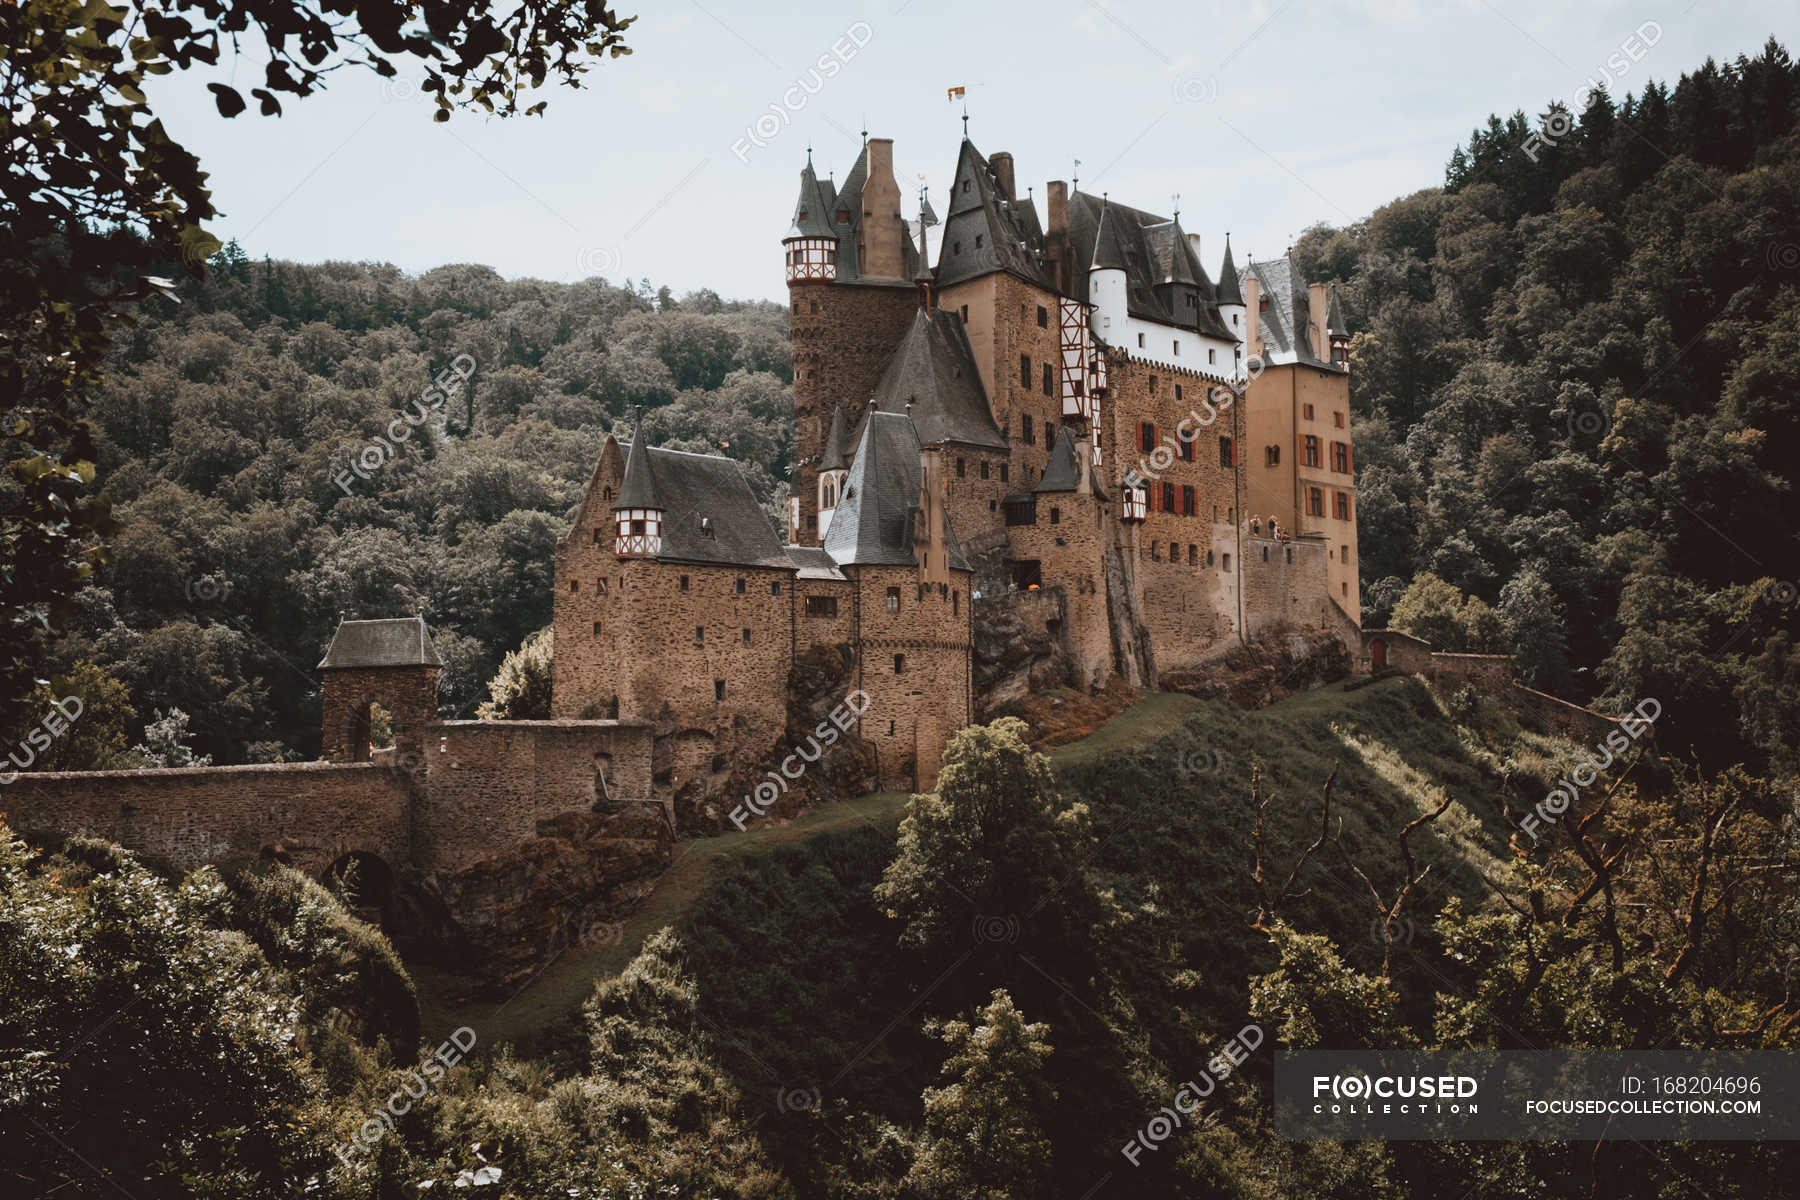 Old castle on green hill — Stock Photo | #168204696